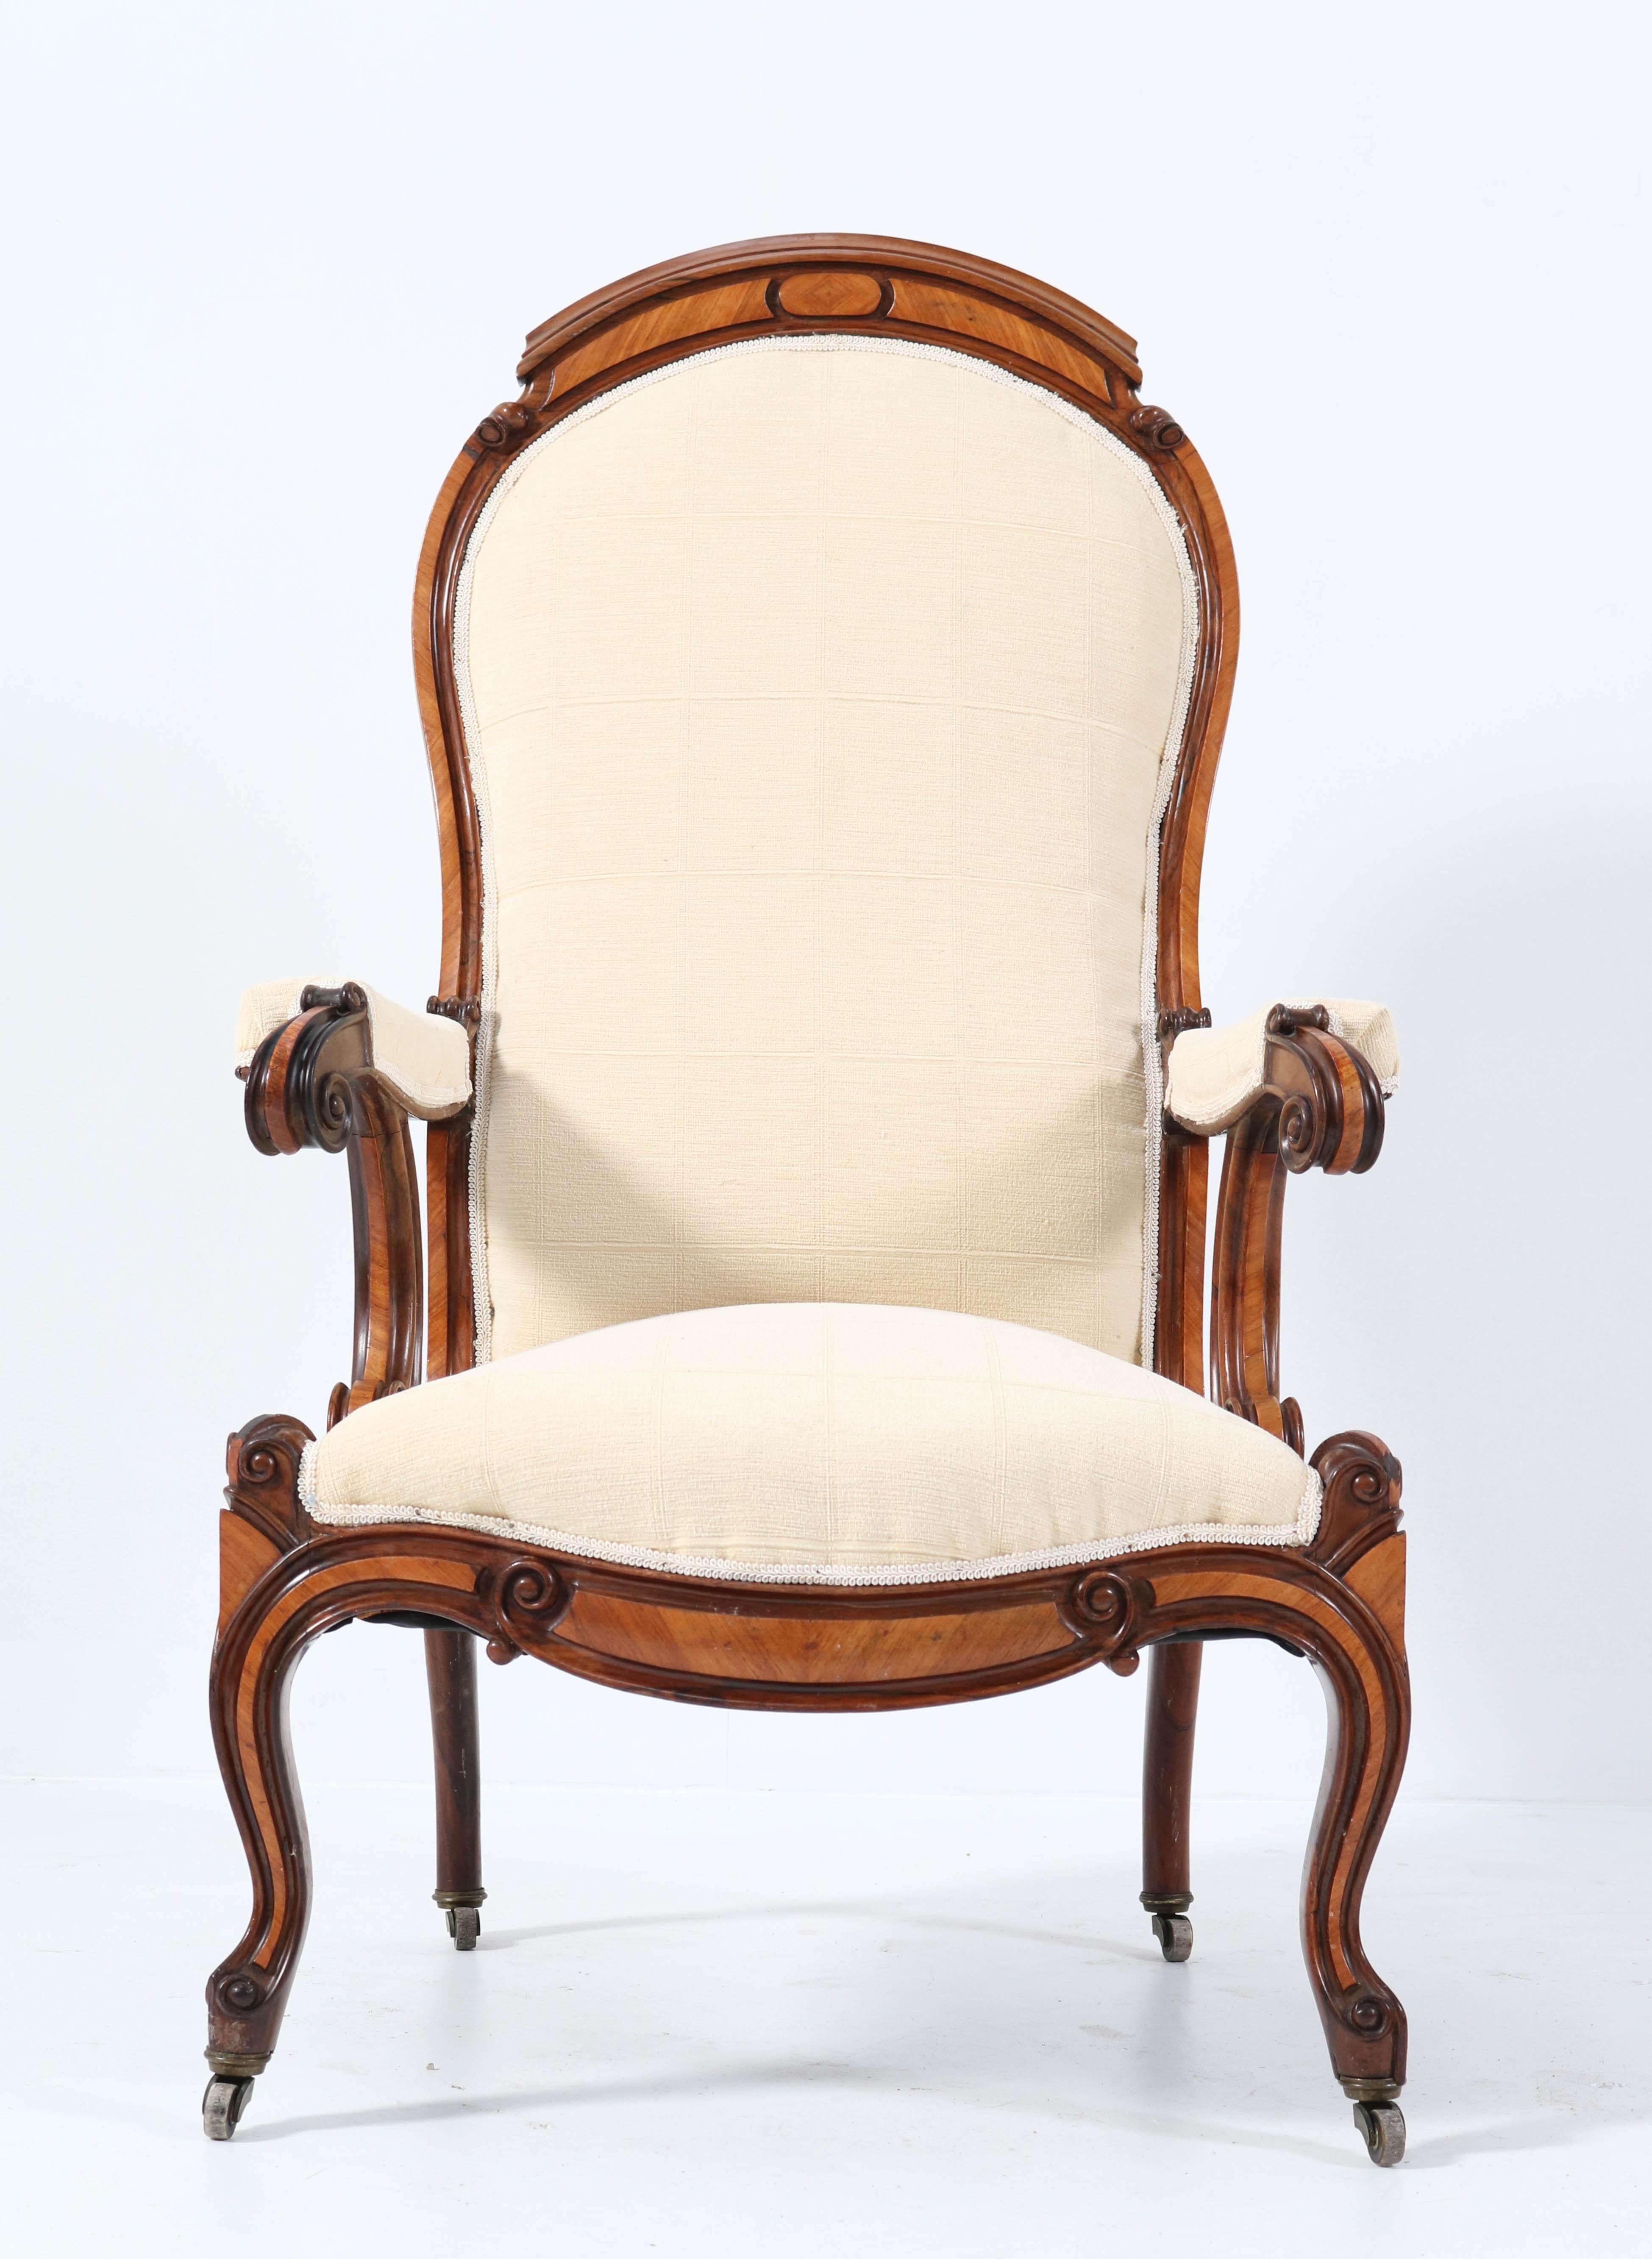 Satinwood Victorian High Back Armchair or Voltaire Chair, 1860s For Sale 3